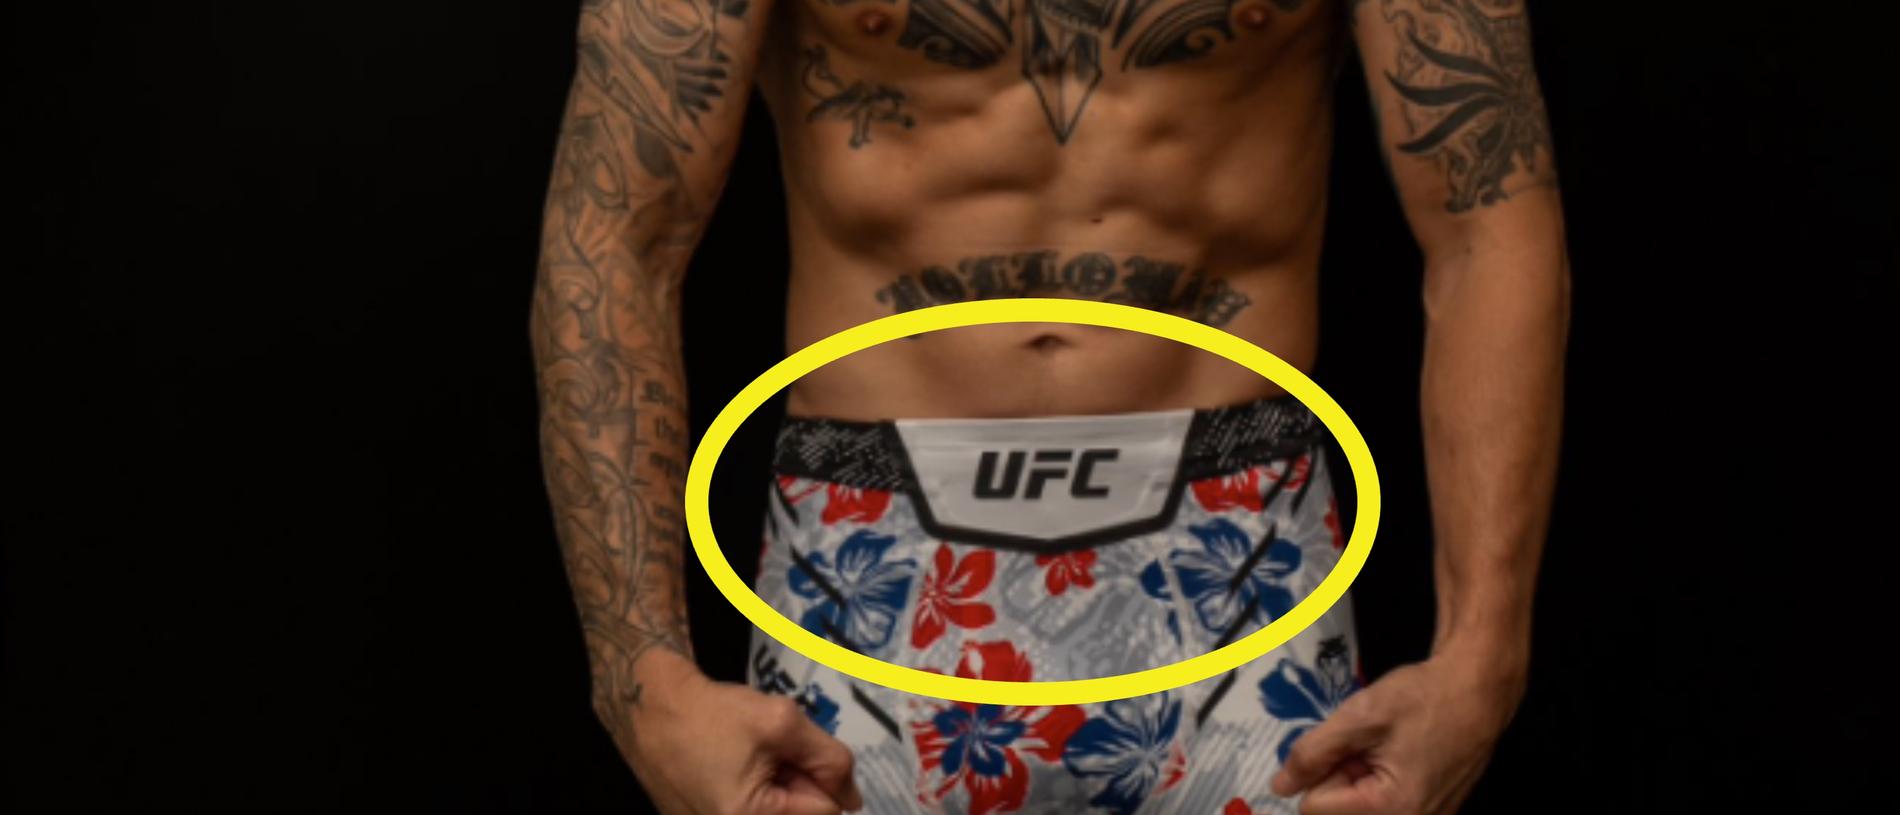 Max Holloway will wear fight shorts with a floral pattern. Picture: Supplied